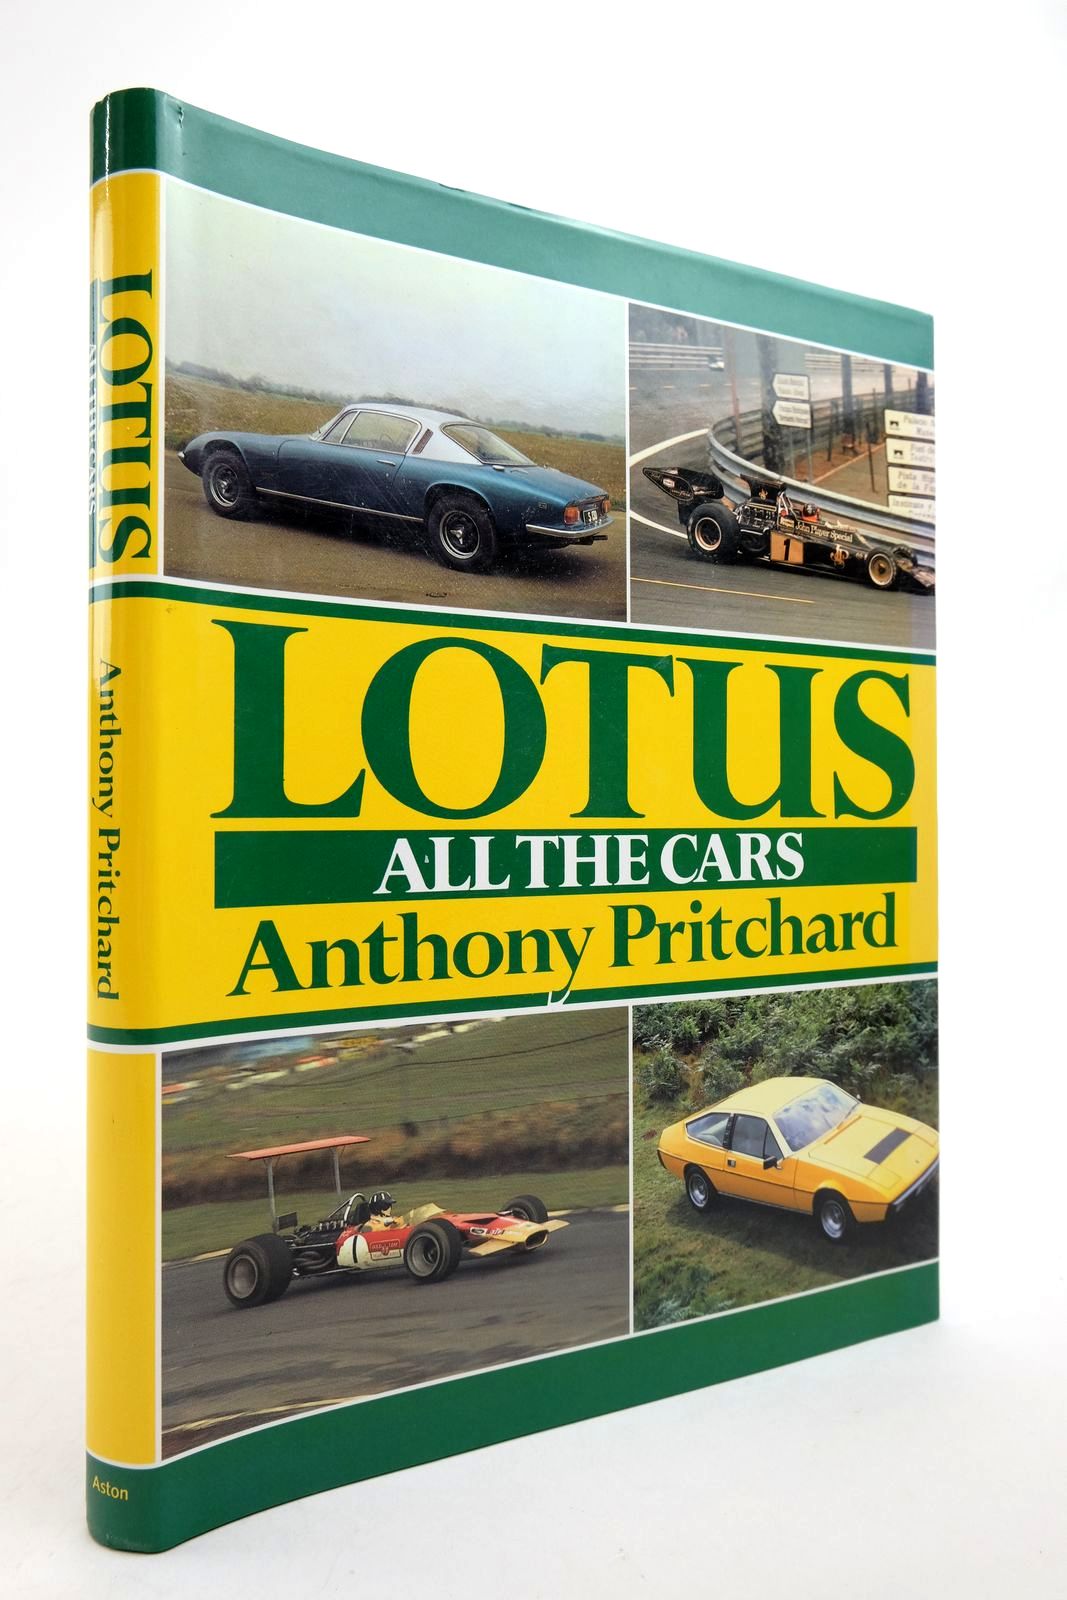 Photo of LOTUS ALL THE CARS written by Pritchard, Anthony published by Aston Publications (STOCK CODE: 2139381)  for sale by Stella & Rose's Books